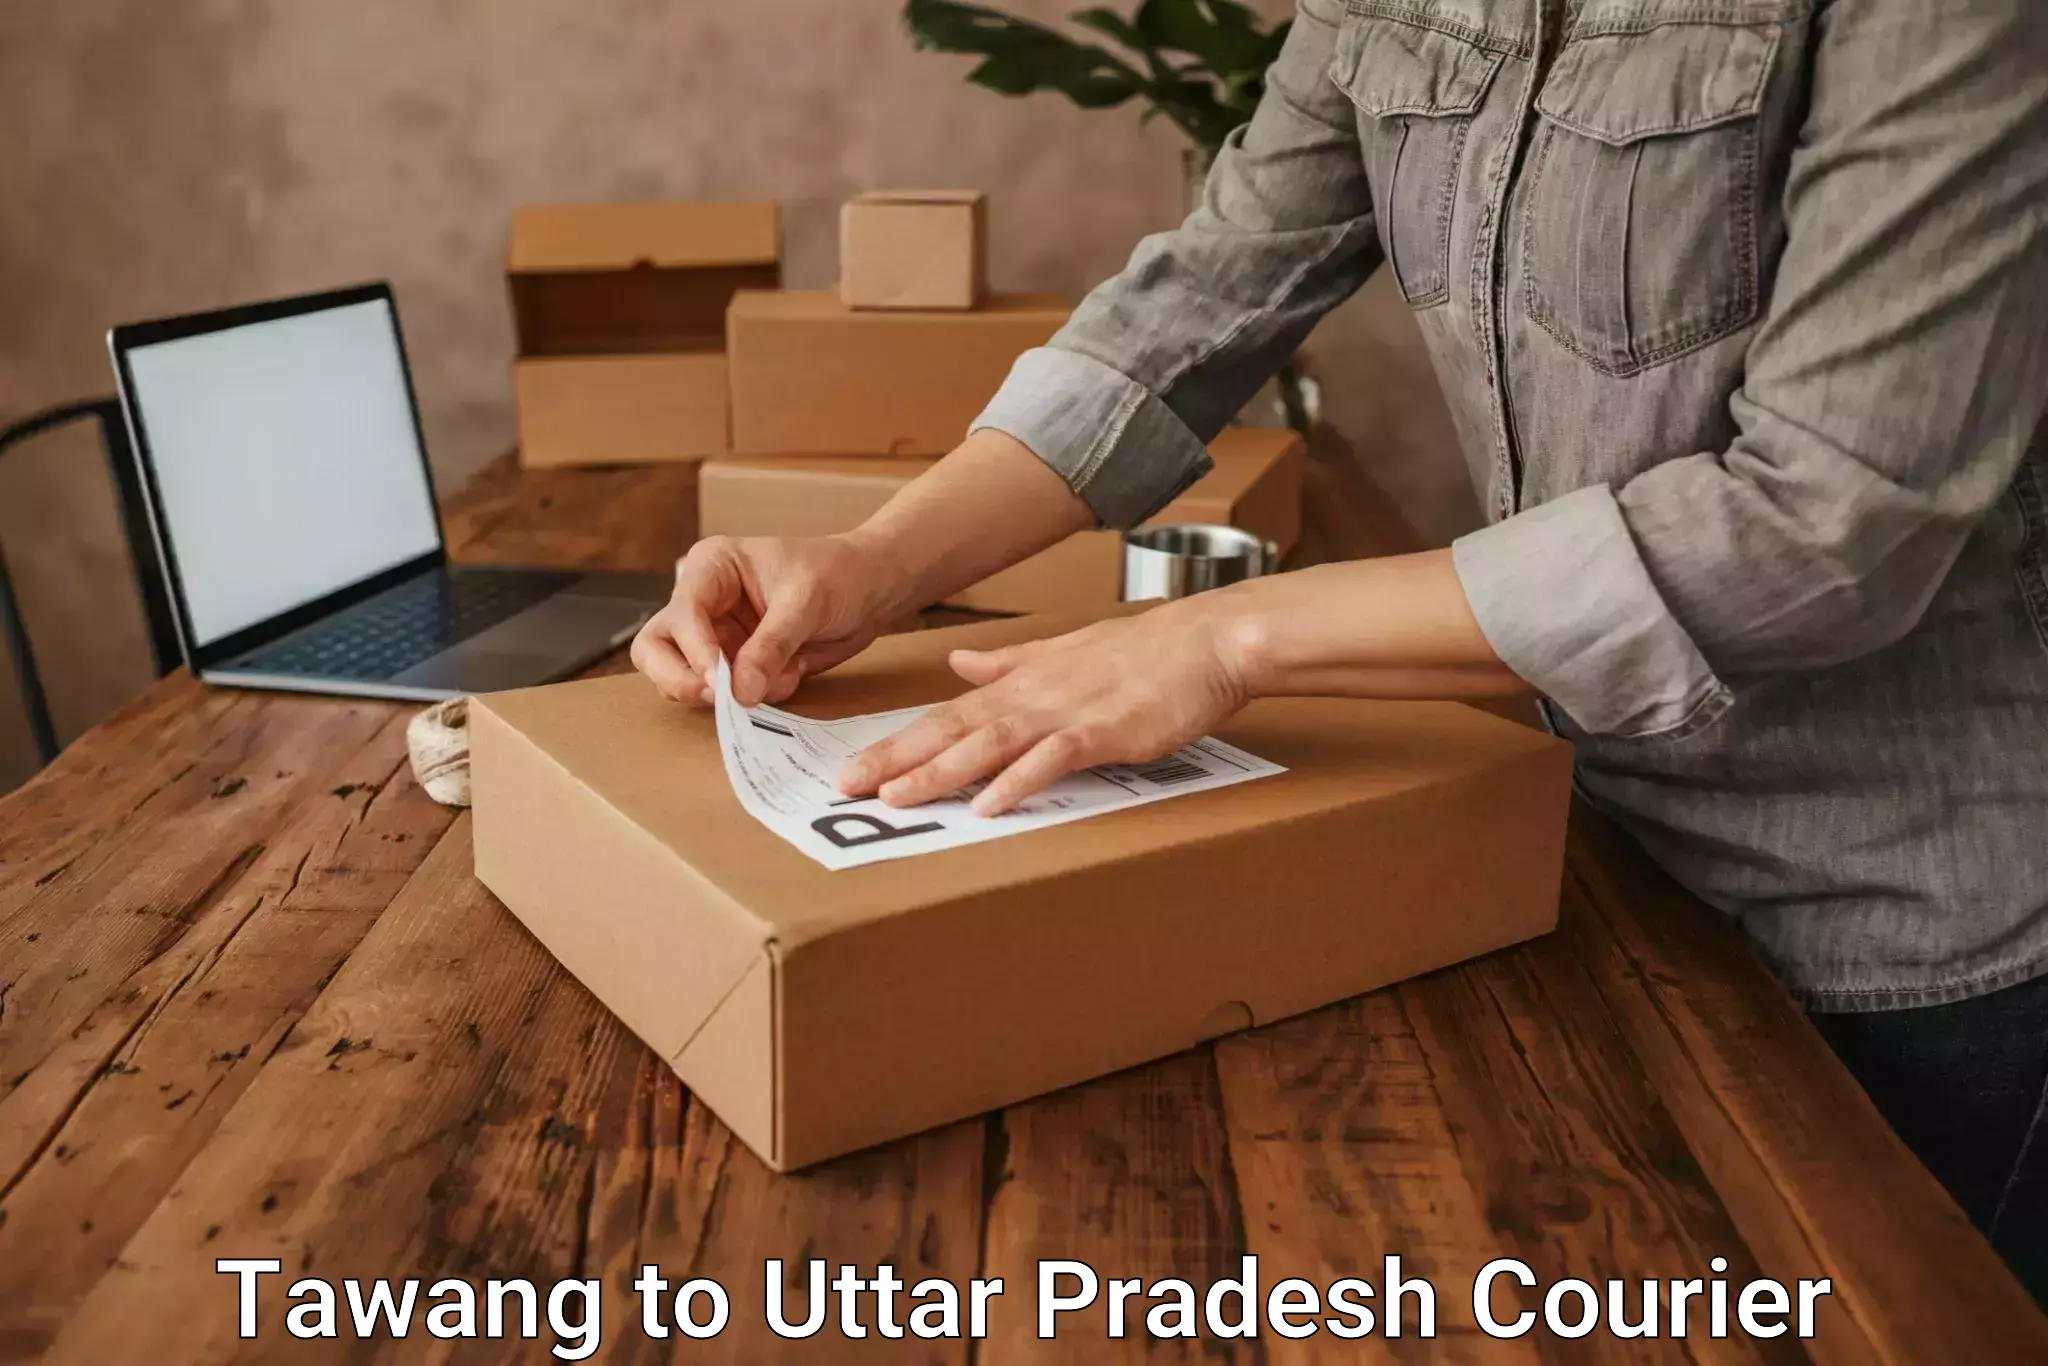 Subscription-based courier Tawang to Aligarh